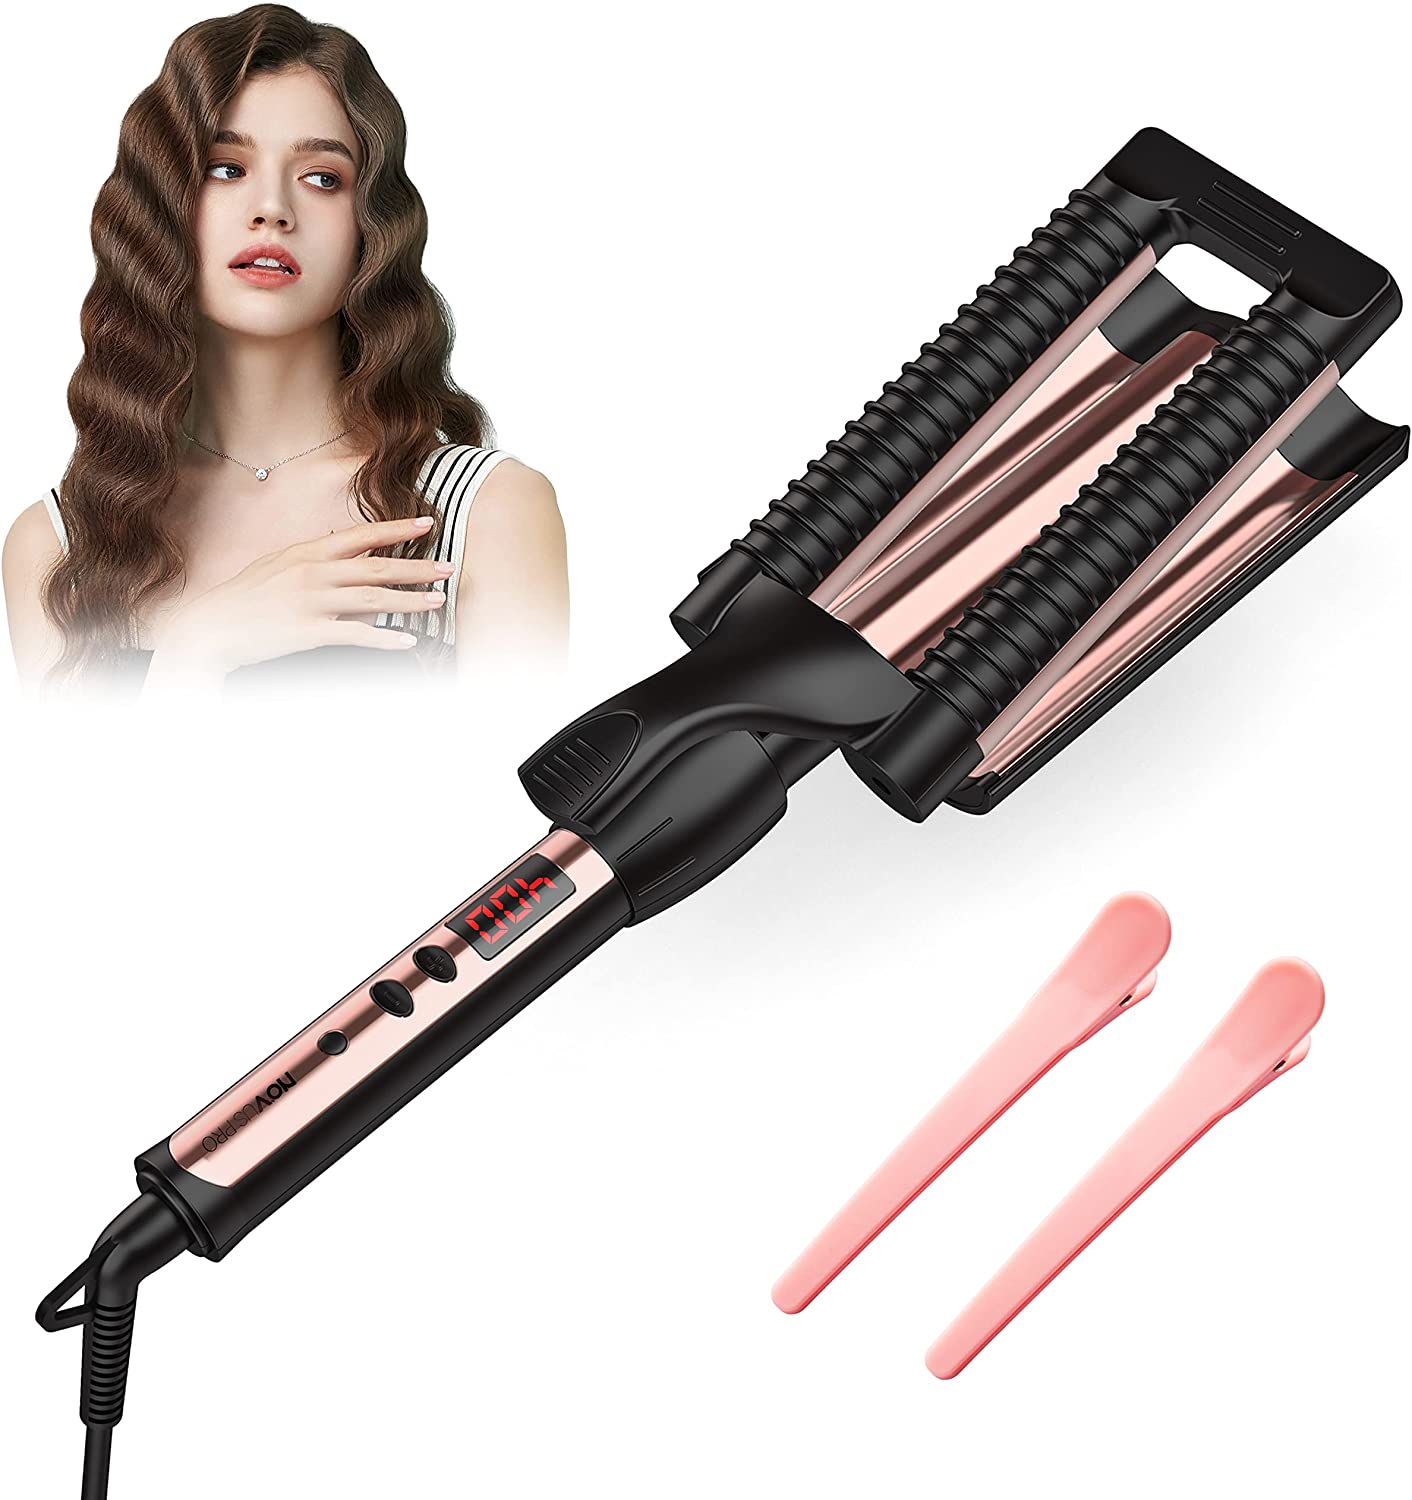 New 3 Barrel Curling Wand 1 Inch Curling Iron with All-Round Anti-Scald Design, Upgrated Triple 1 Inch Beach Hair Waver with LED Temperature Display, Digital Temperature Control, Hair Crimper